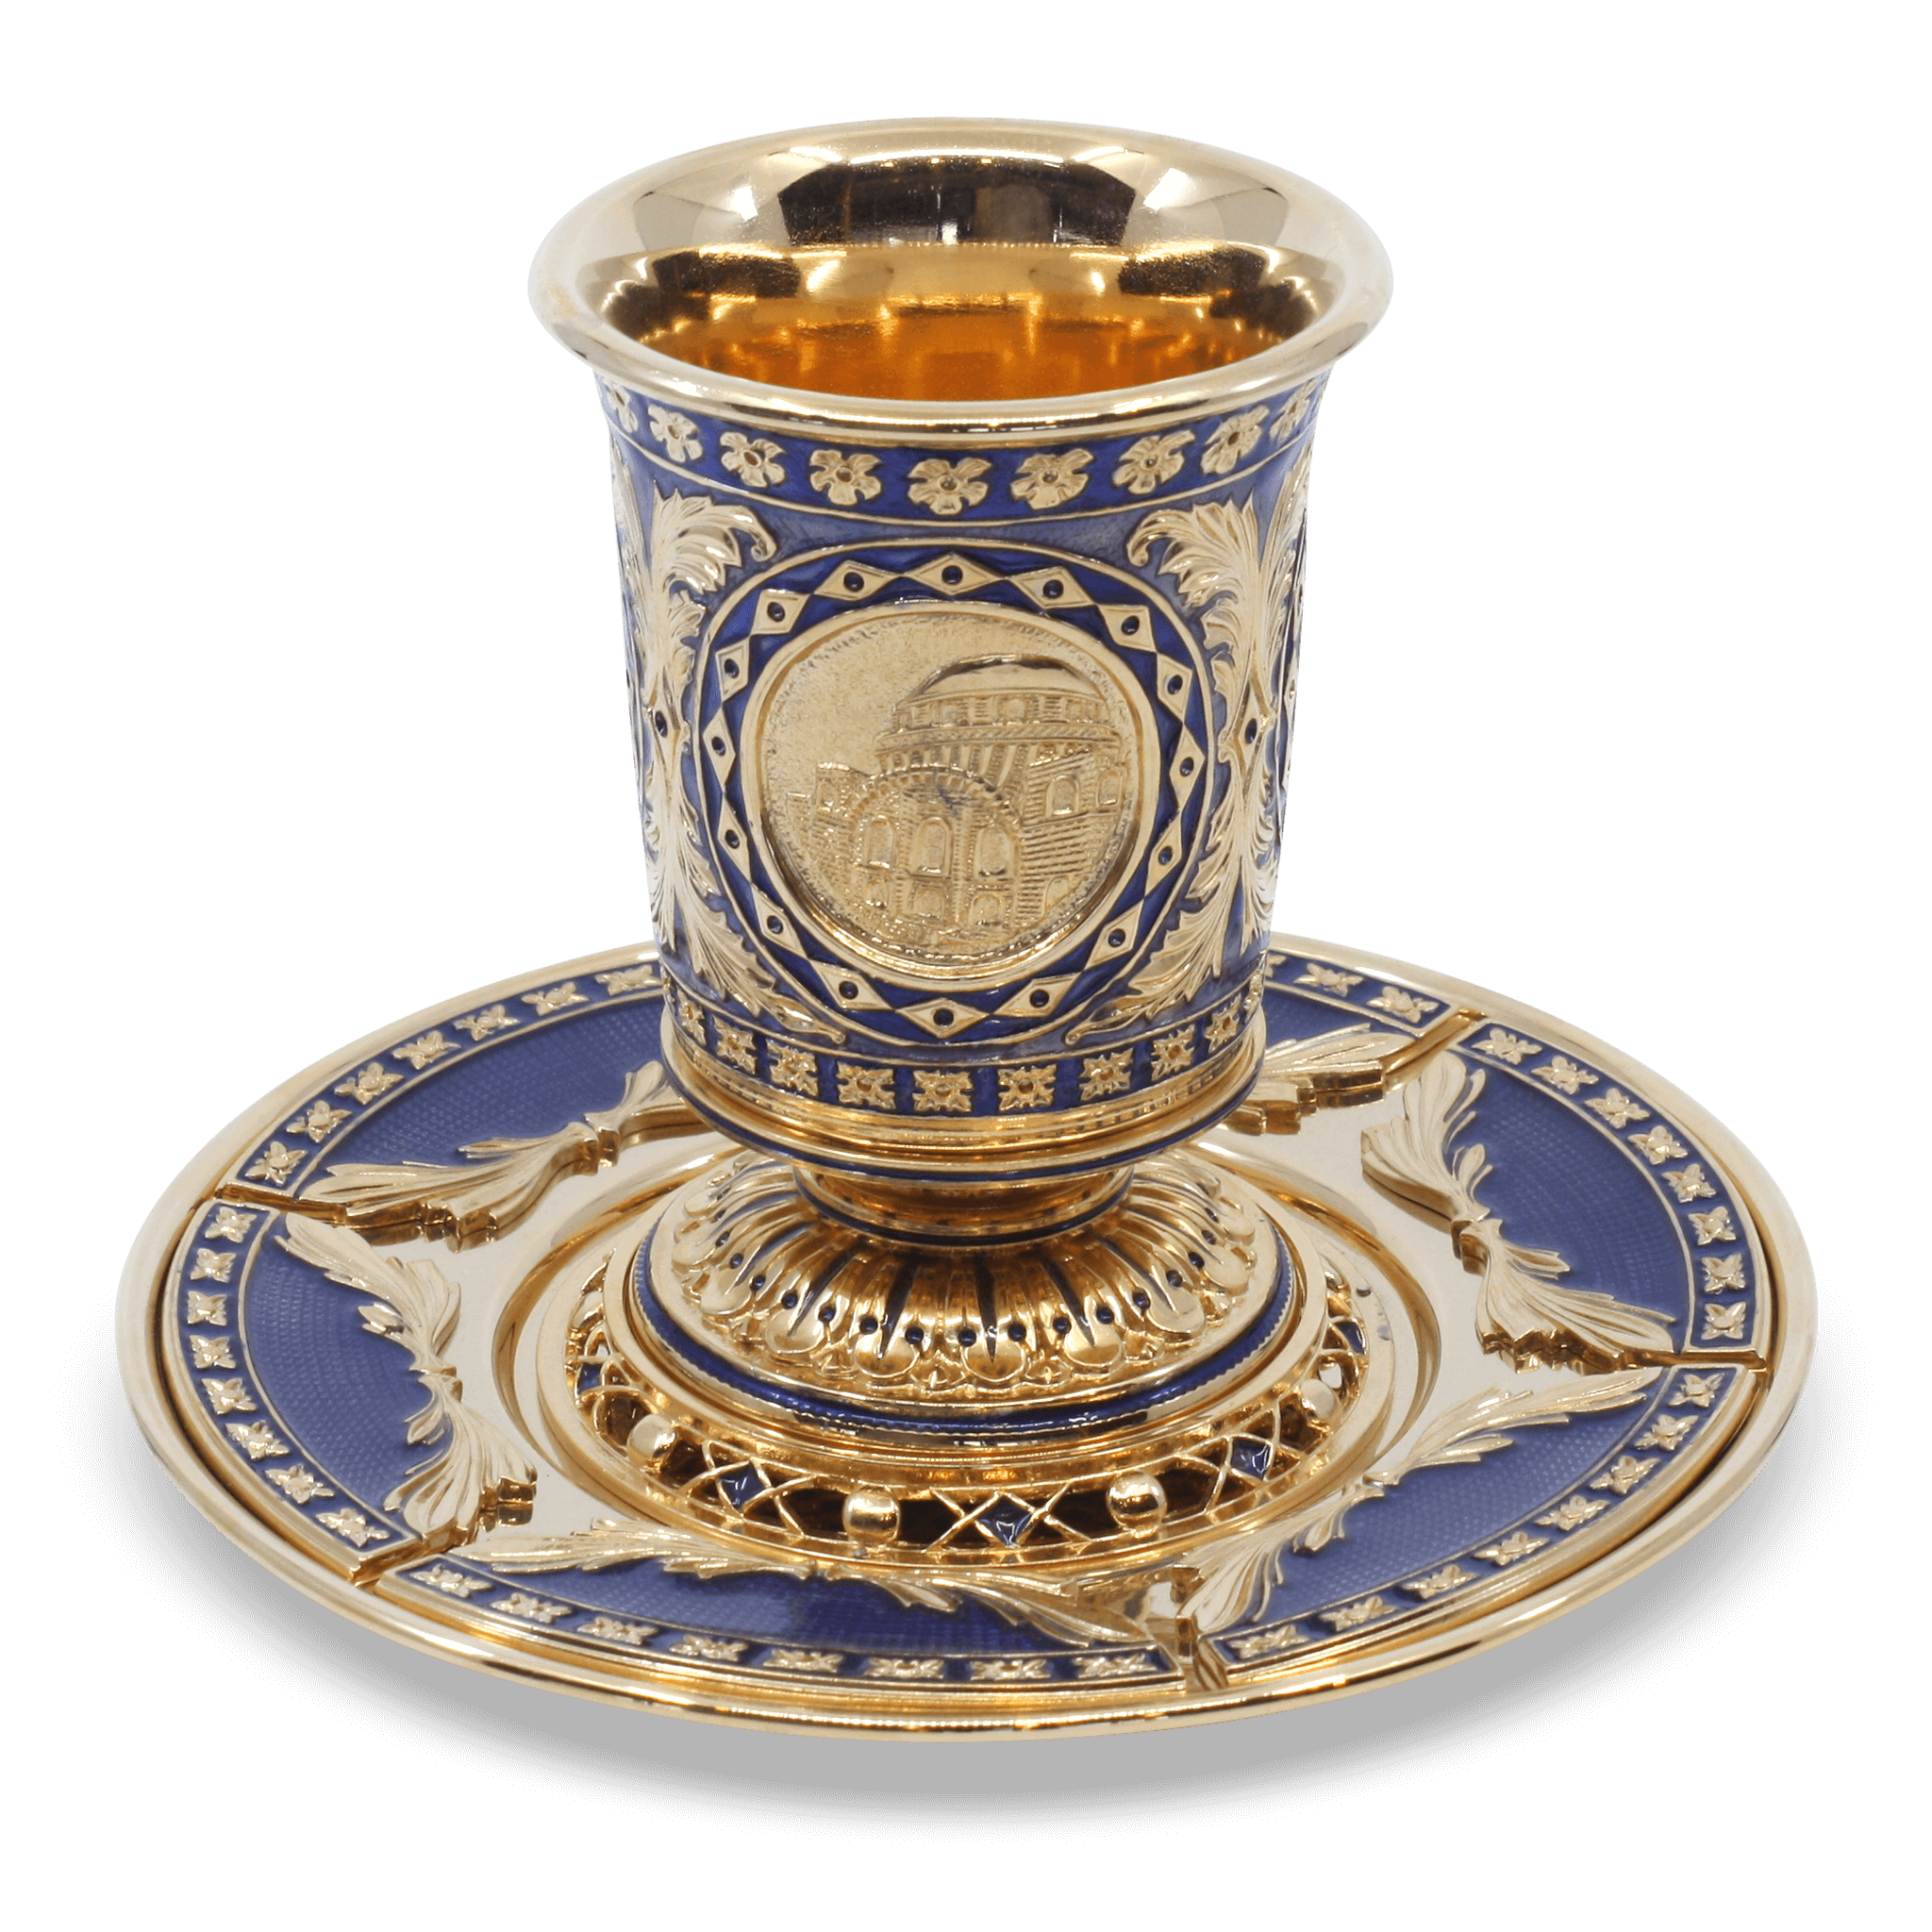 GOLD AND BLUE KIDDUSH CUP - Piece By Zion Hadad